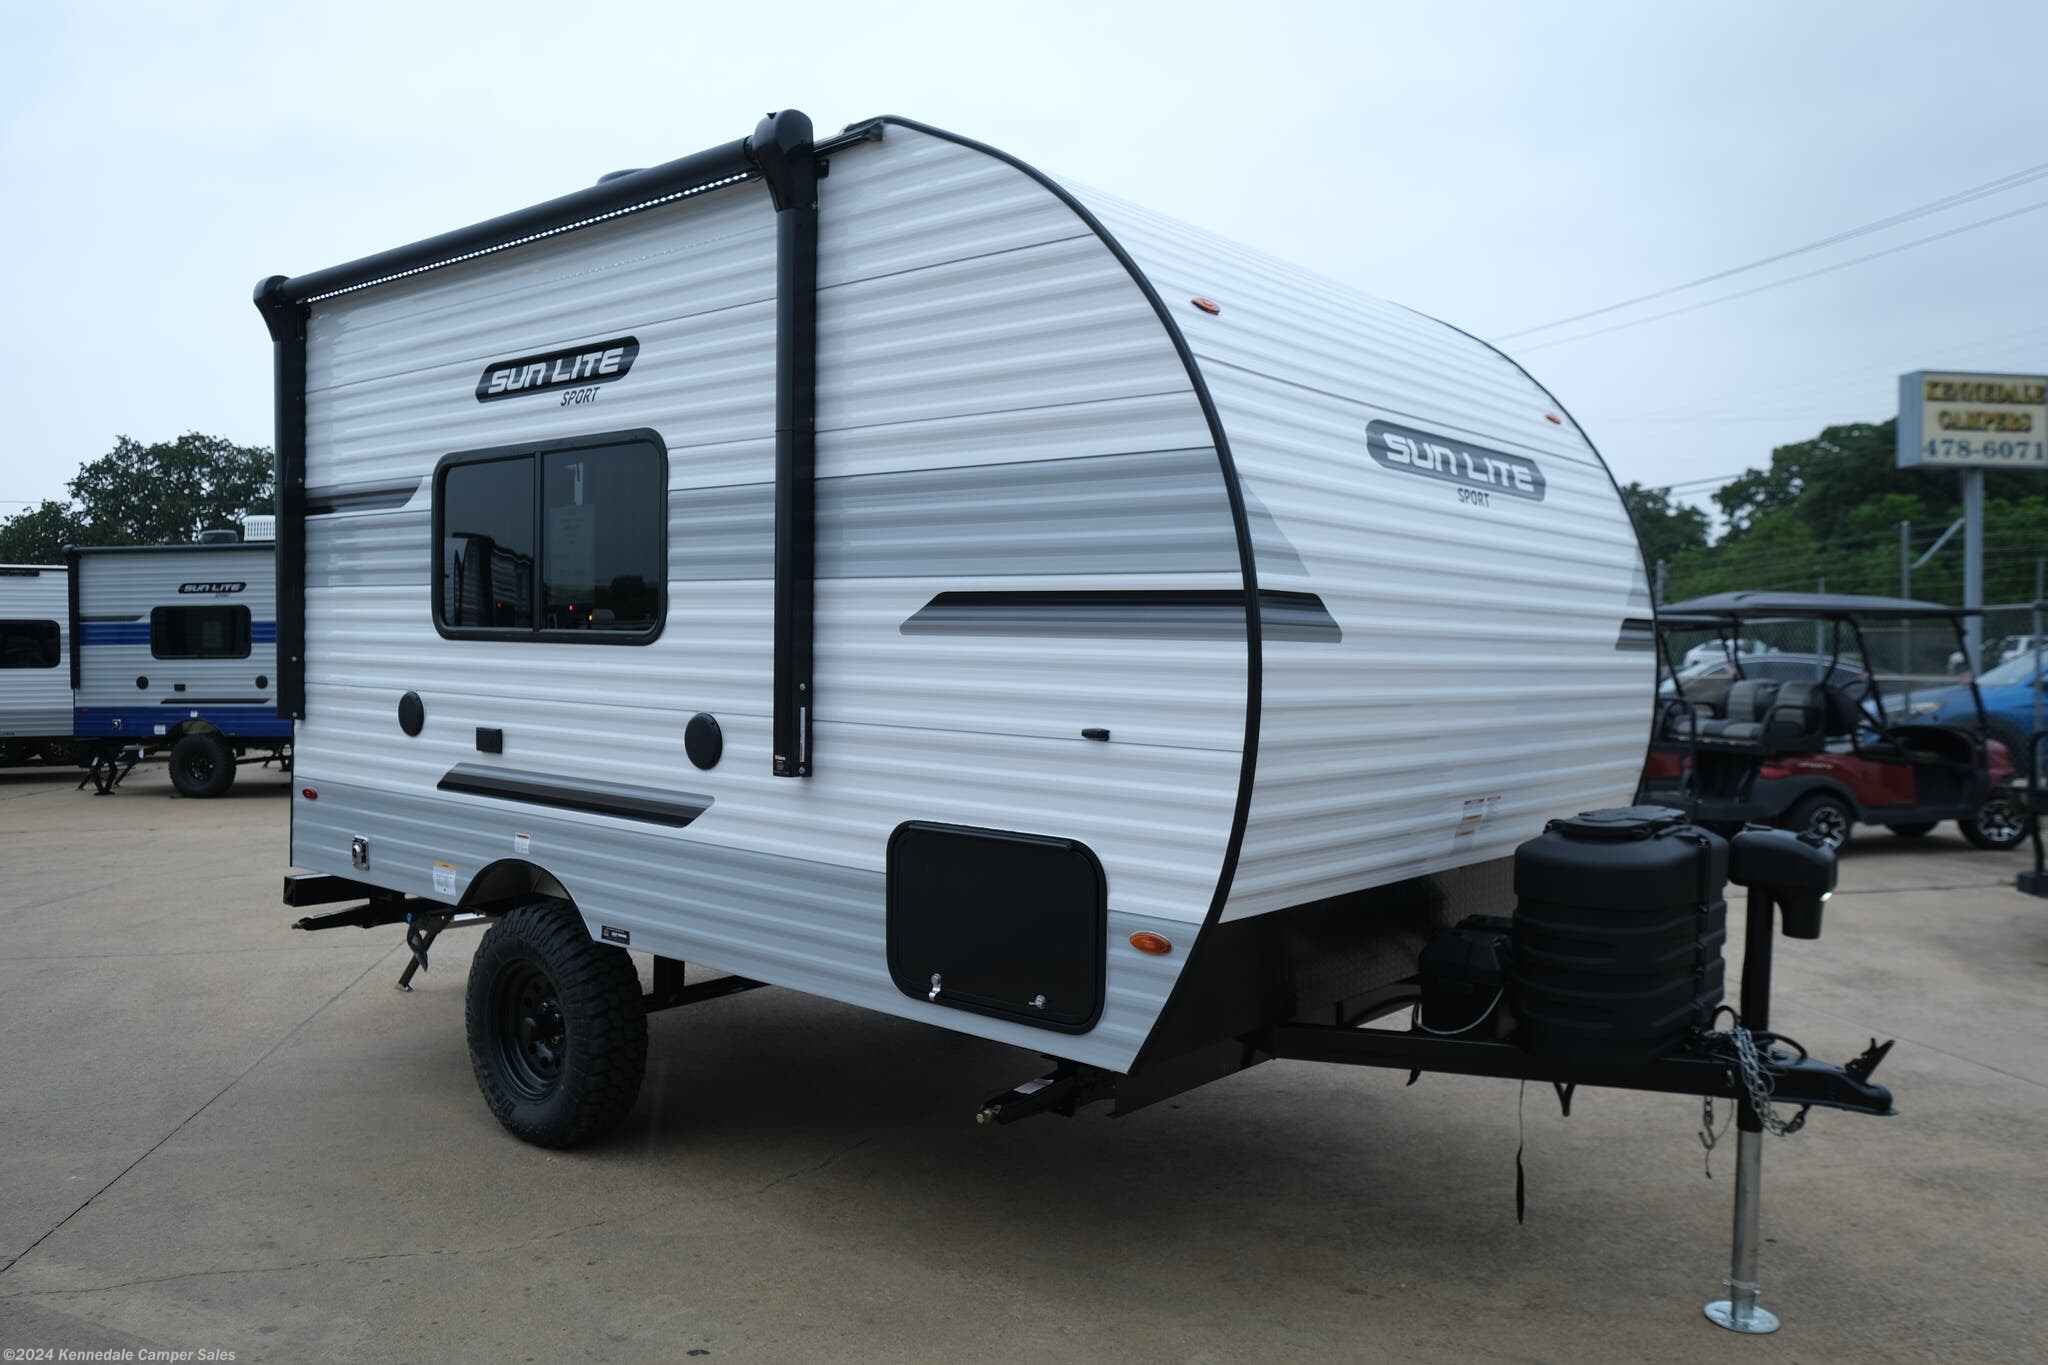 2024 Sunset Park RV Sun Lite 16BH RV for Sale in Kennedale, TX 76060